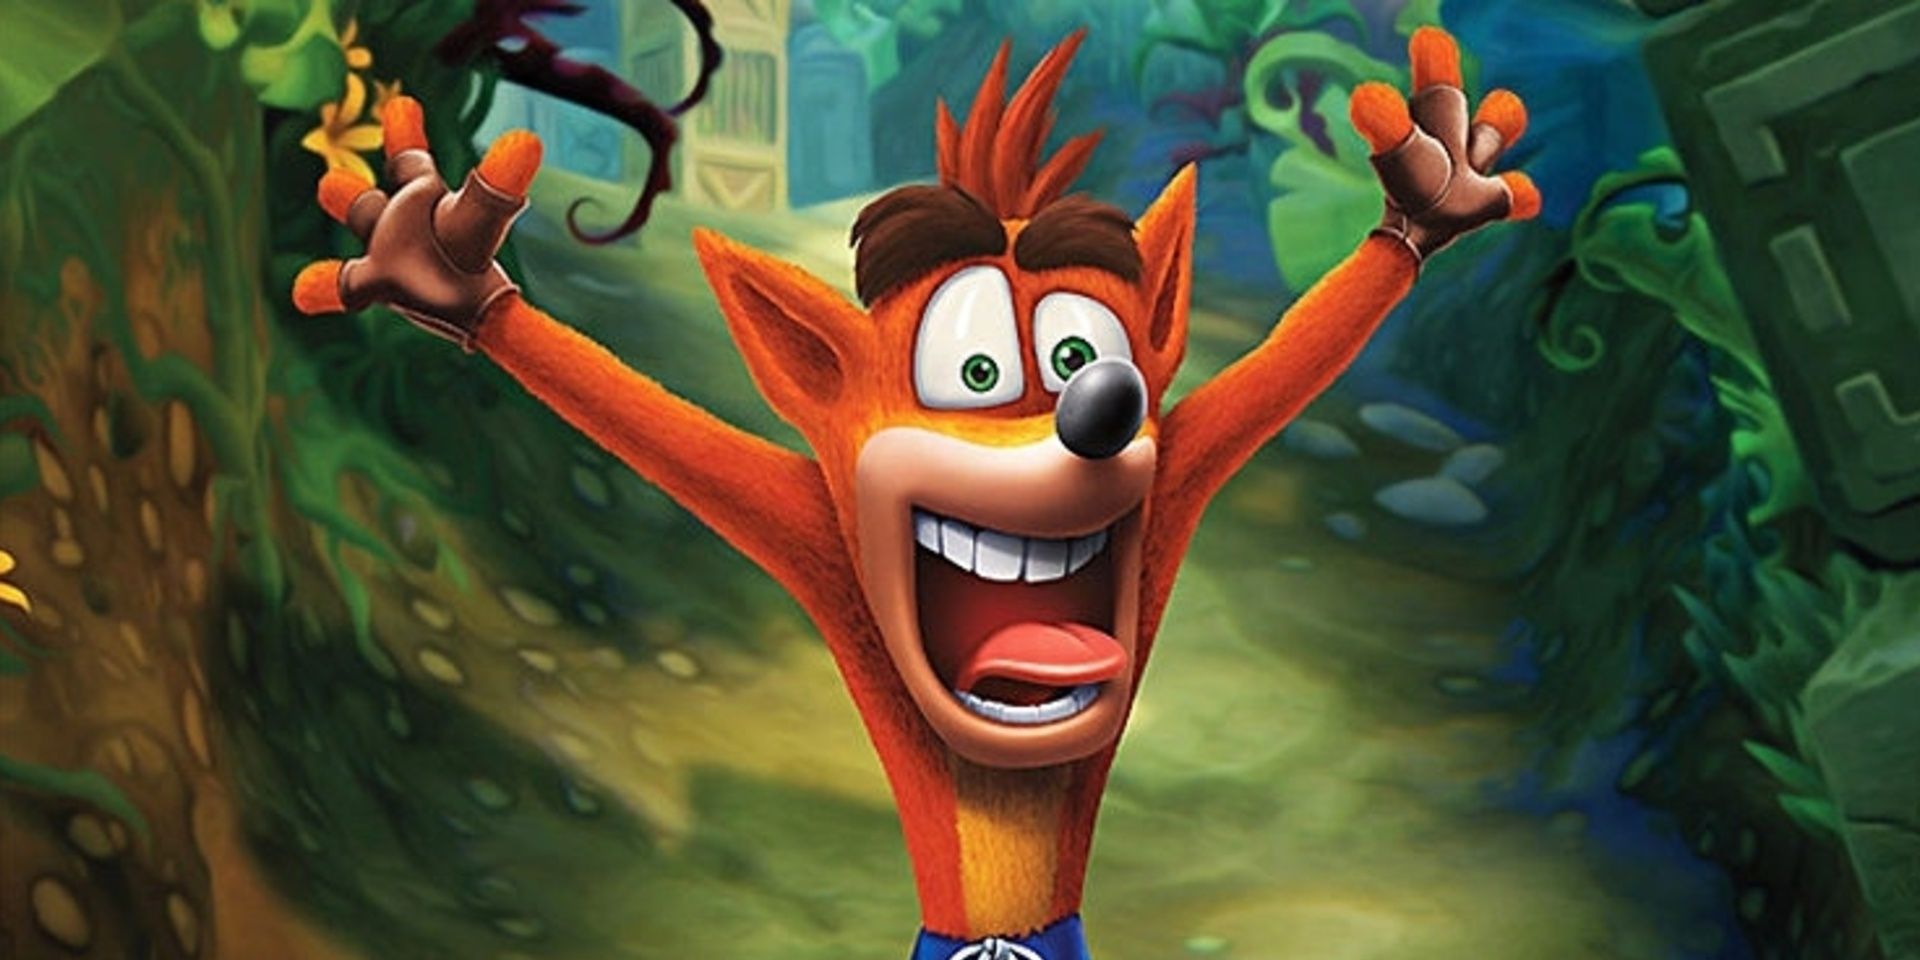 Entry 5 Crash Bandicoot Scream Arms In Air Cropped